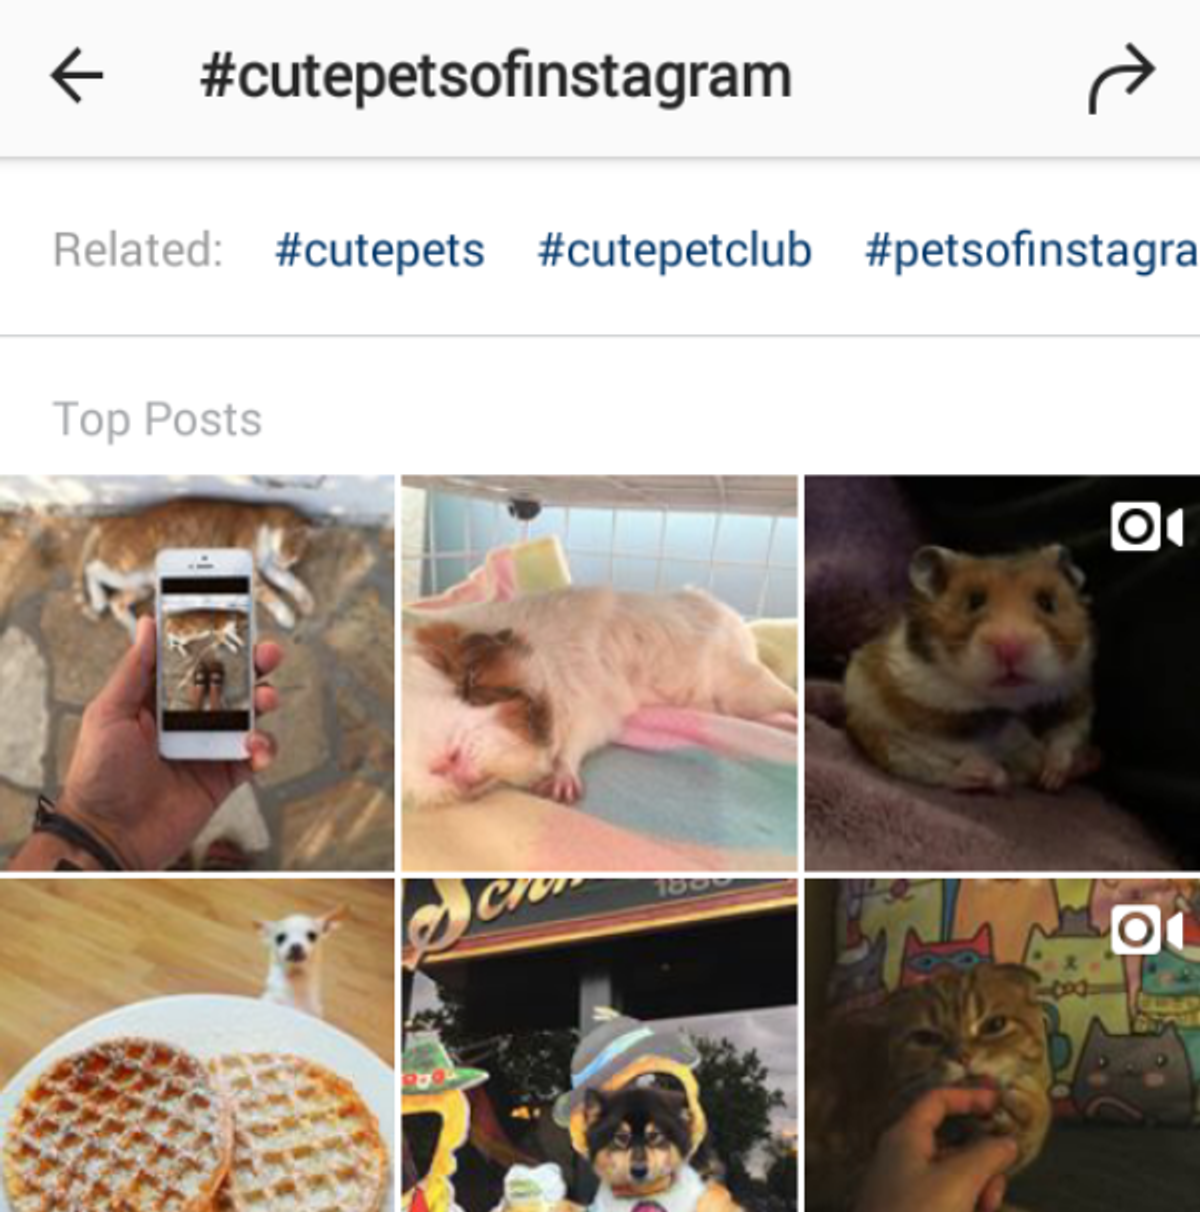 6 Reasons You Should Create An Instagram Account For Your Pet(s)